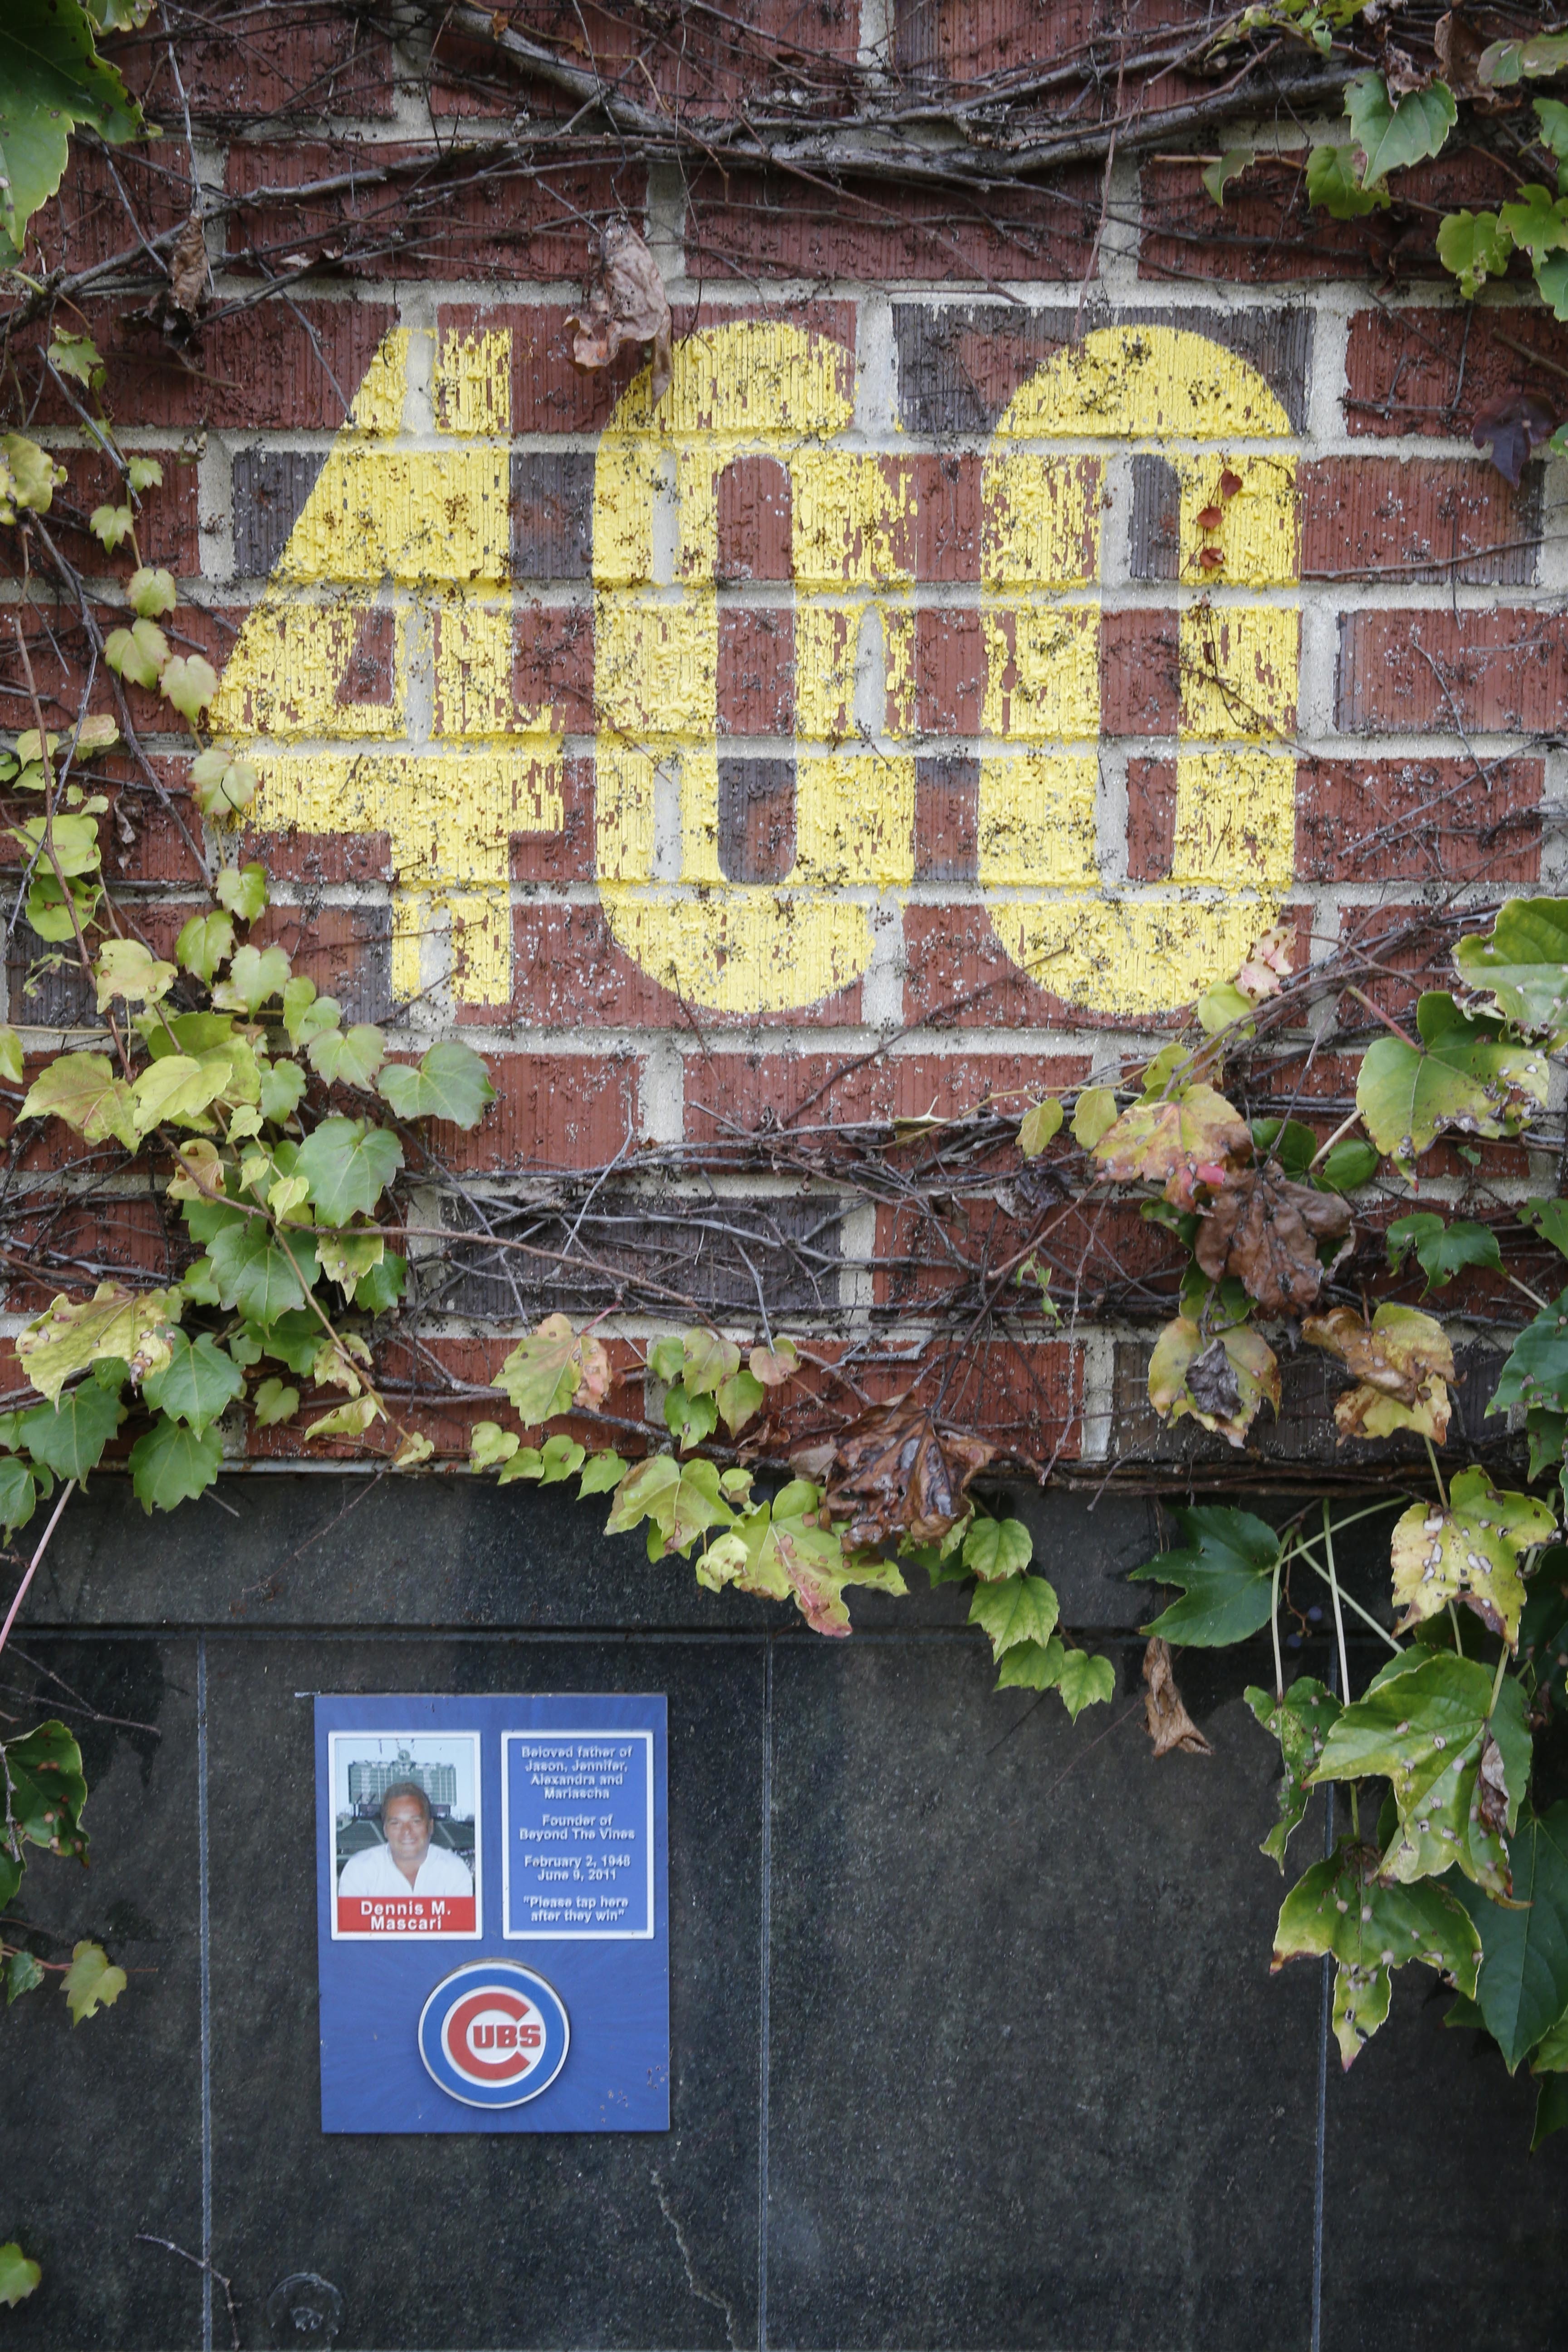 A replica of Wrigley Field's outfield ivy walls, is the final resting place for the ashes of nine Cubs fans at the Bohemian Cemetery, Wednesday, Oct. 19, 2016, in Chicago. The Wrigley Field themed mausoleum wall was the dream of Dennis M. Mascari, who's ashes are places just below the 400 feet marker. (AP Photo/Charles Rex Arbogast)